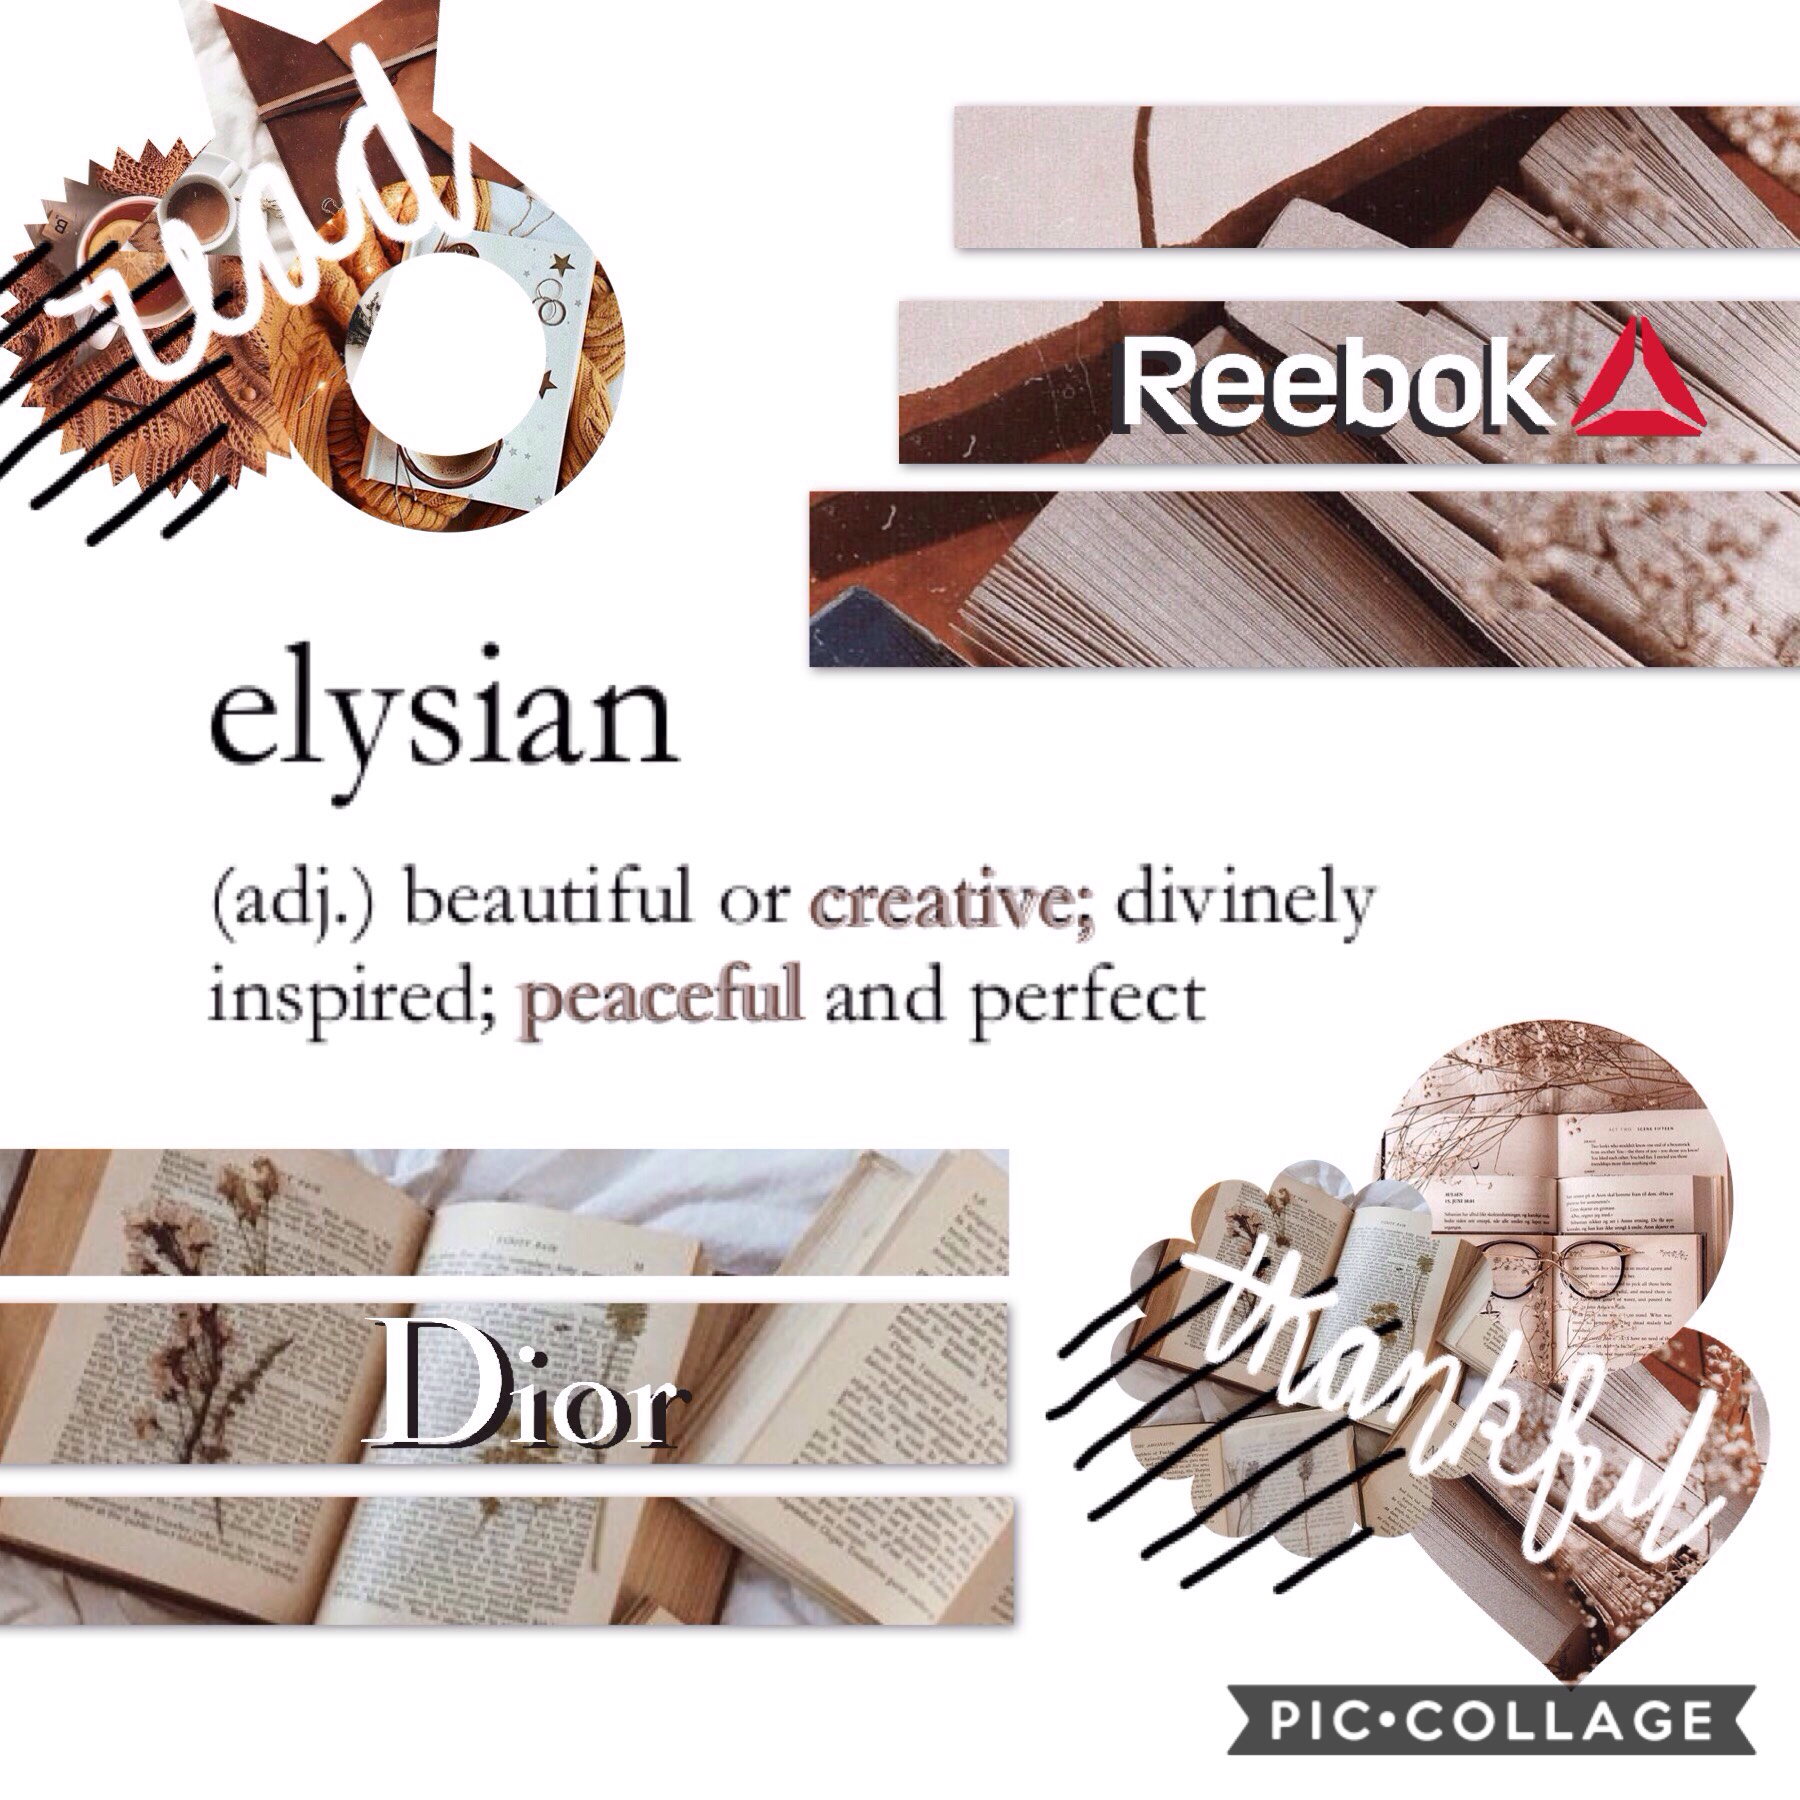 >> elysian << "beautiful or creative; divinely inspired; peaceful or perfect" 
✨📖☕️  15><09><19
hey all! You've probably never heard of this but HAPPY RUOK DAY! (for info check my extras acc @positivity_pcsurveys)
Hands up if you're a bookworm! 📚🐛🙋
YUSSSS